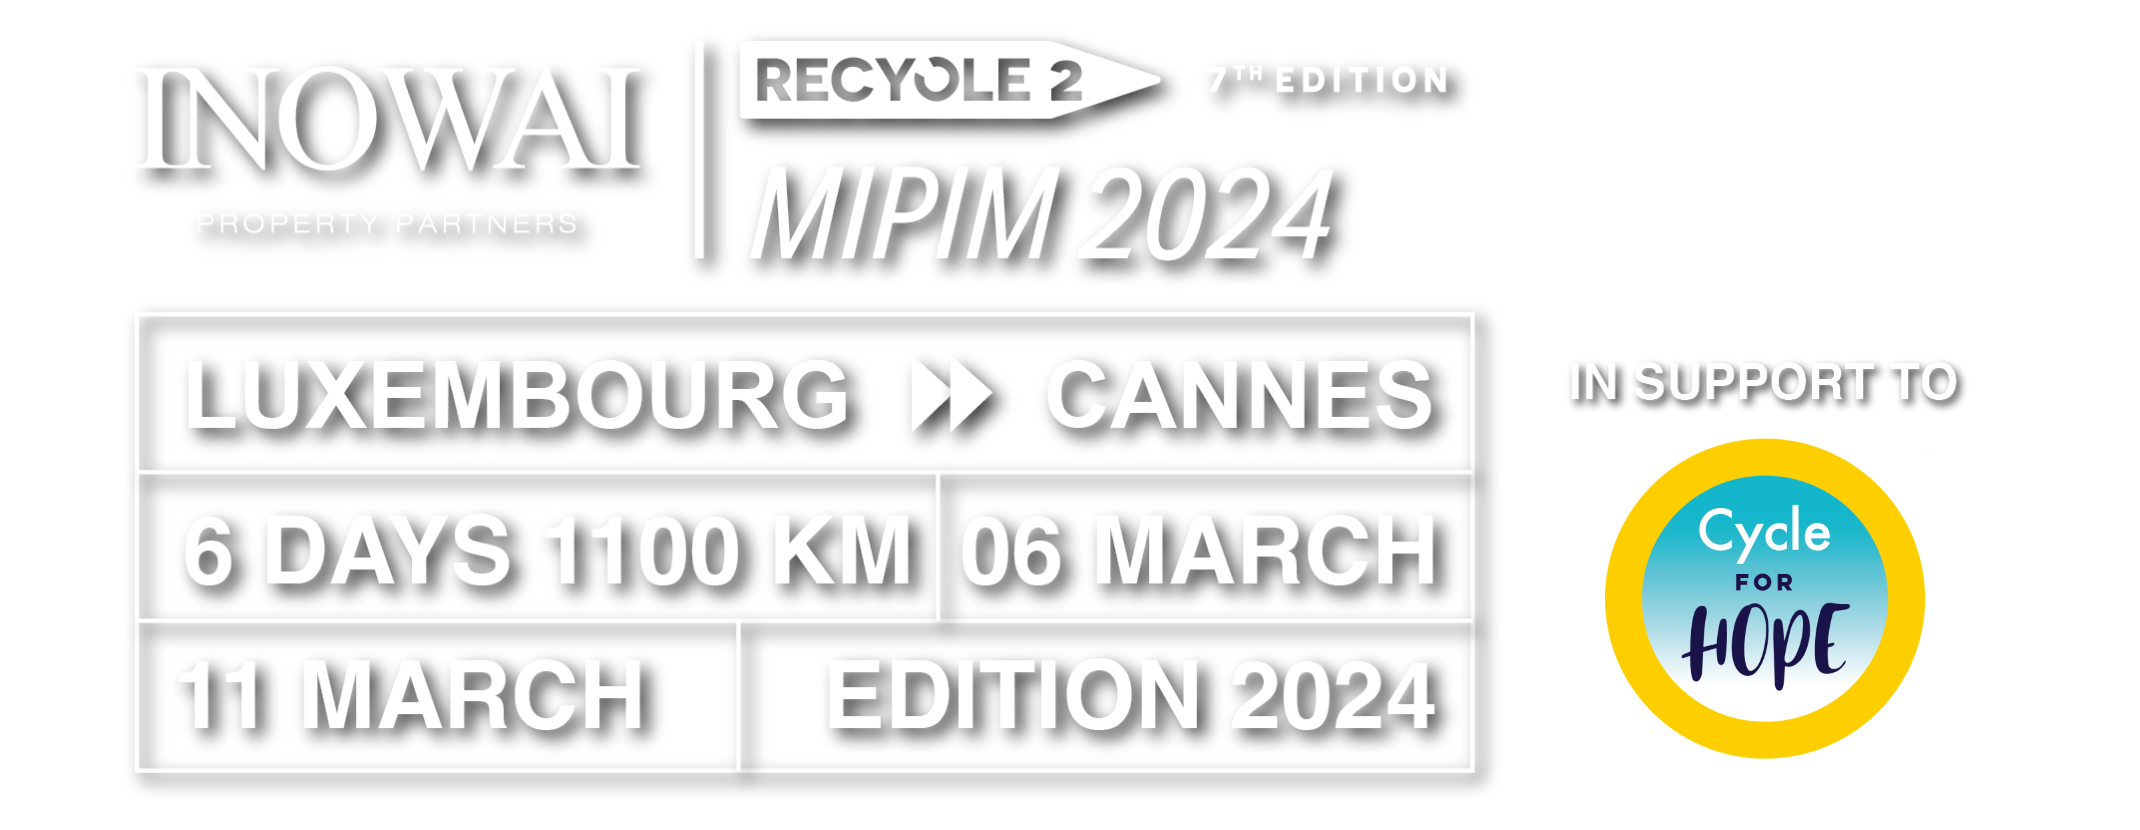 Mipim 2024, Luxembourg -> Cannes, 6 days 1100 km, 6 march to 11 march, in support to Cycle for Hope.